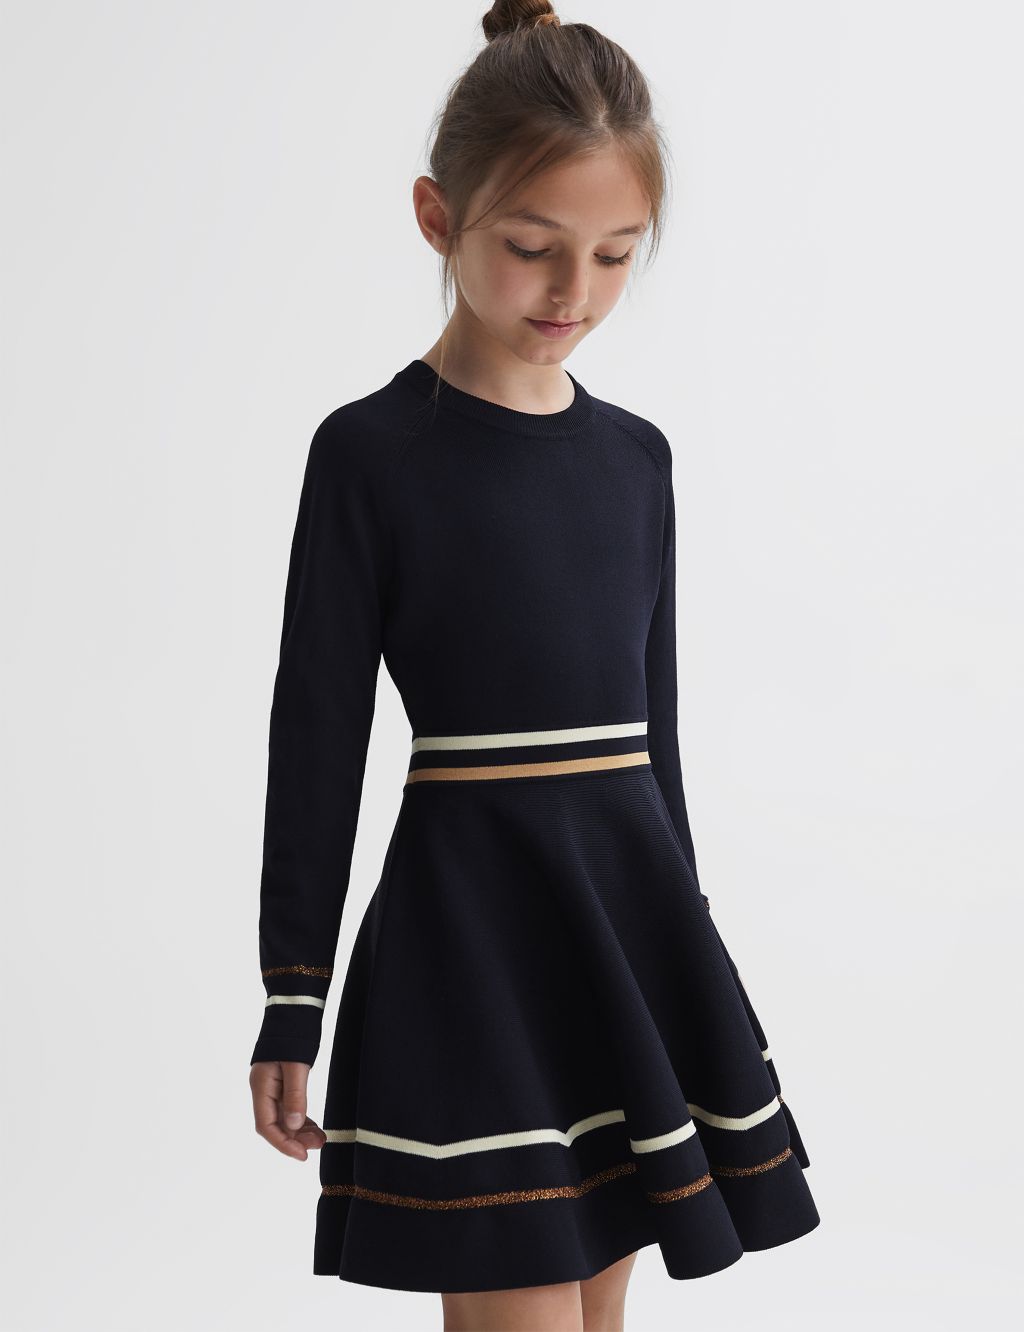 Knitted Striped Dress (4-12 Yrs) image 1